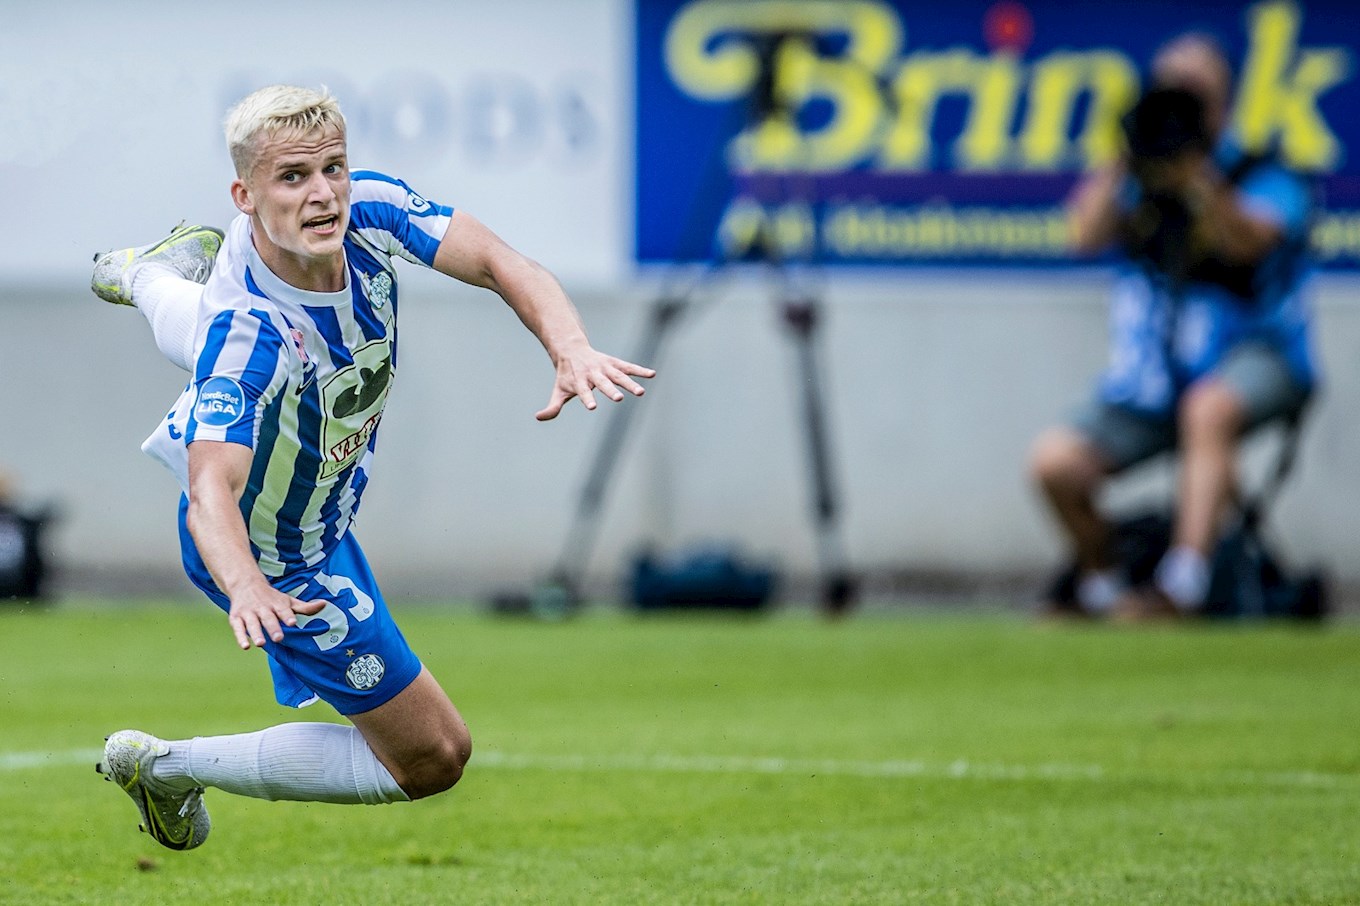 Charlie Winfield in action for Esbjerg fB